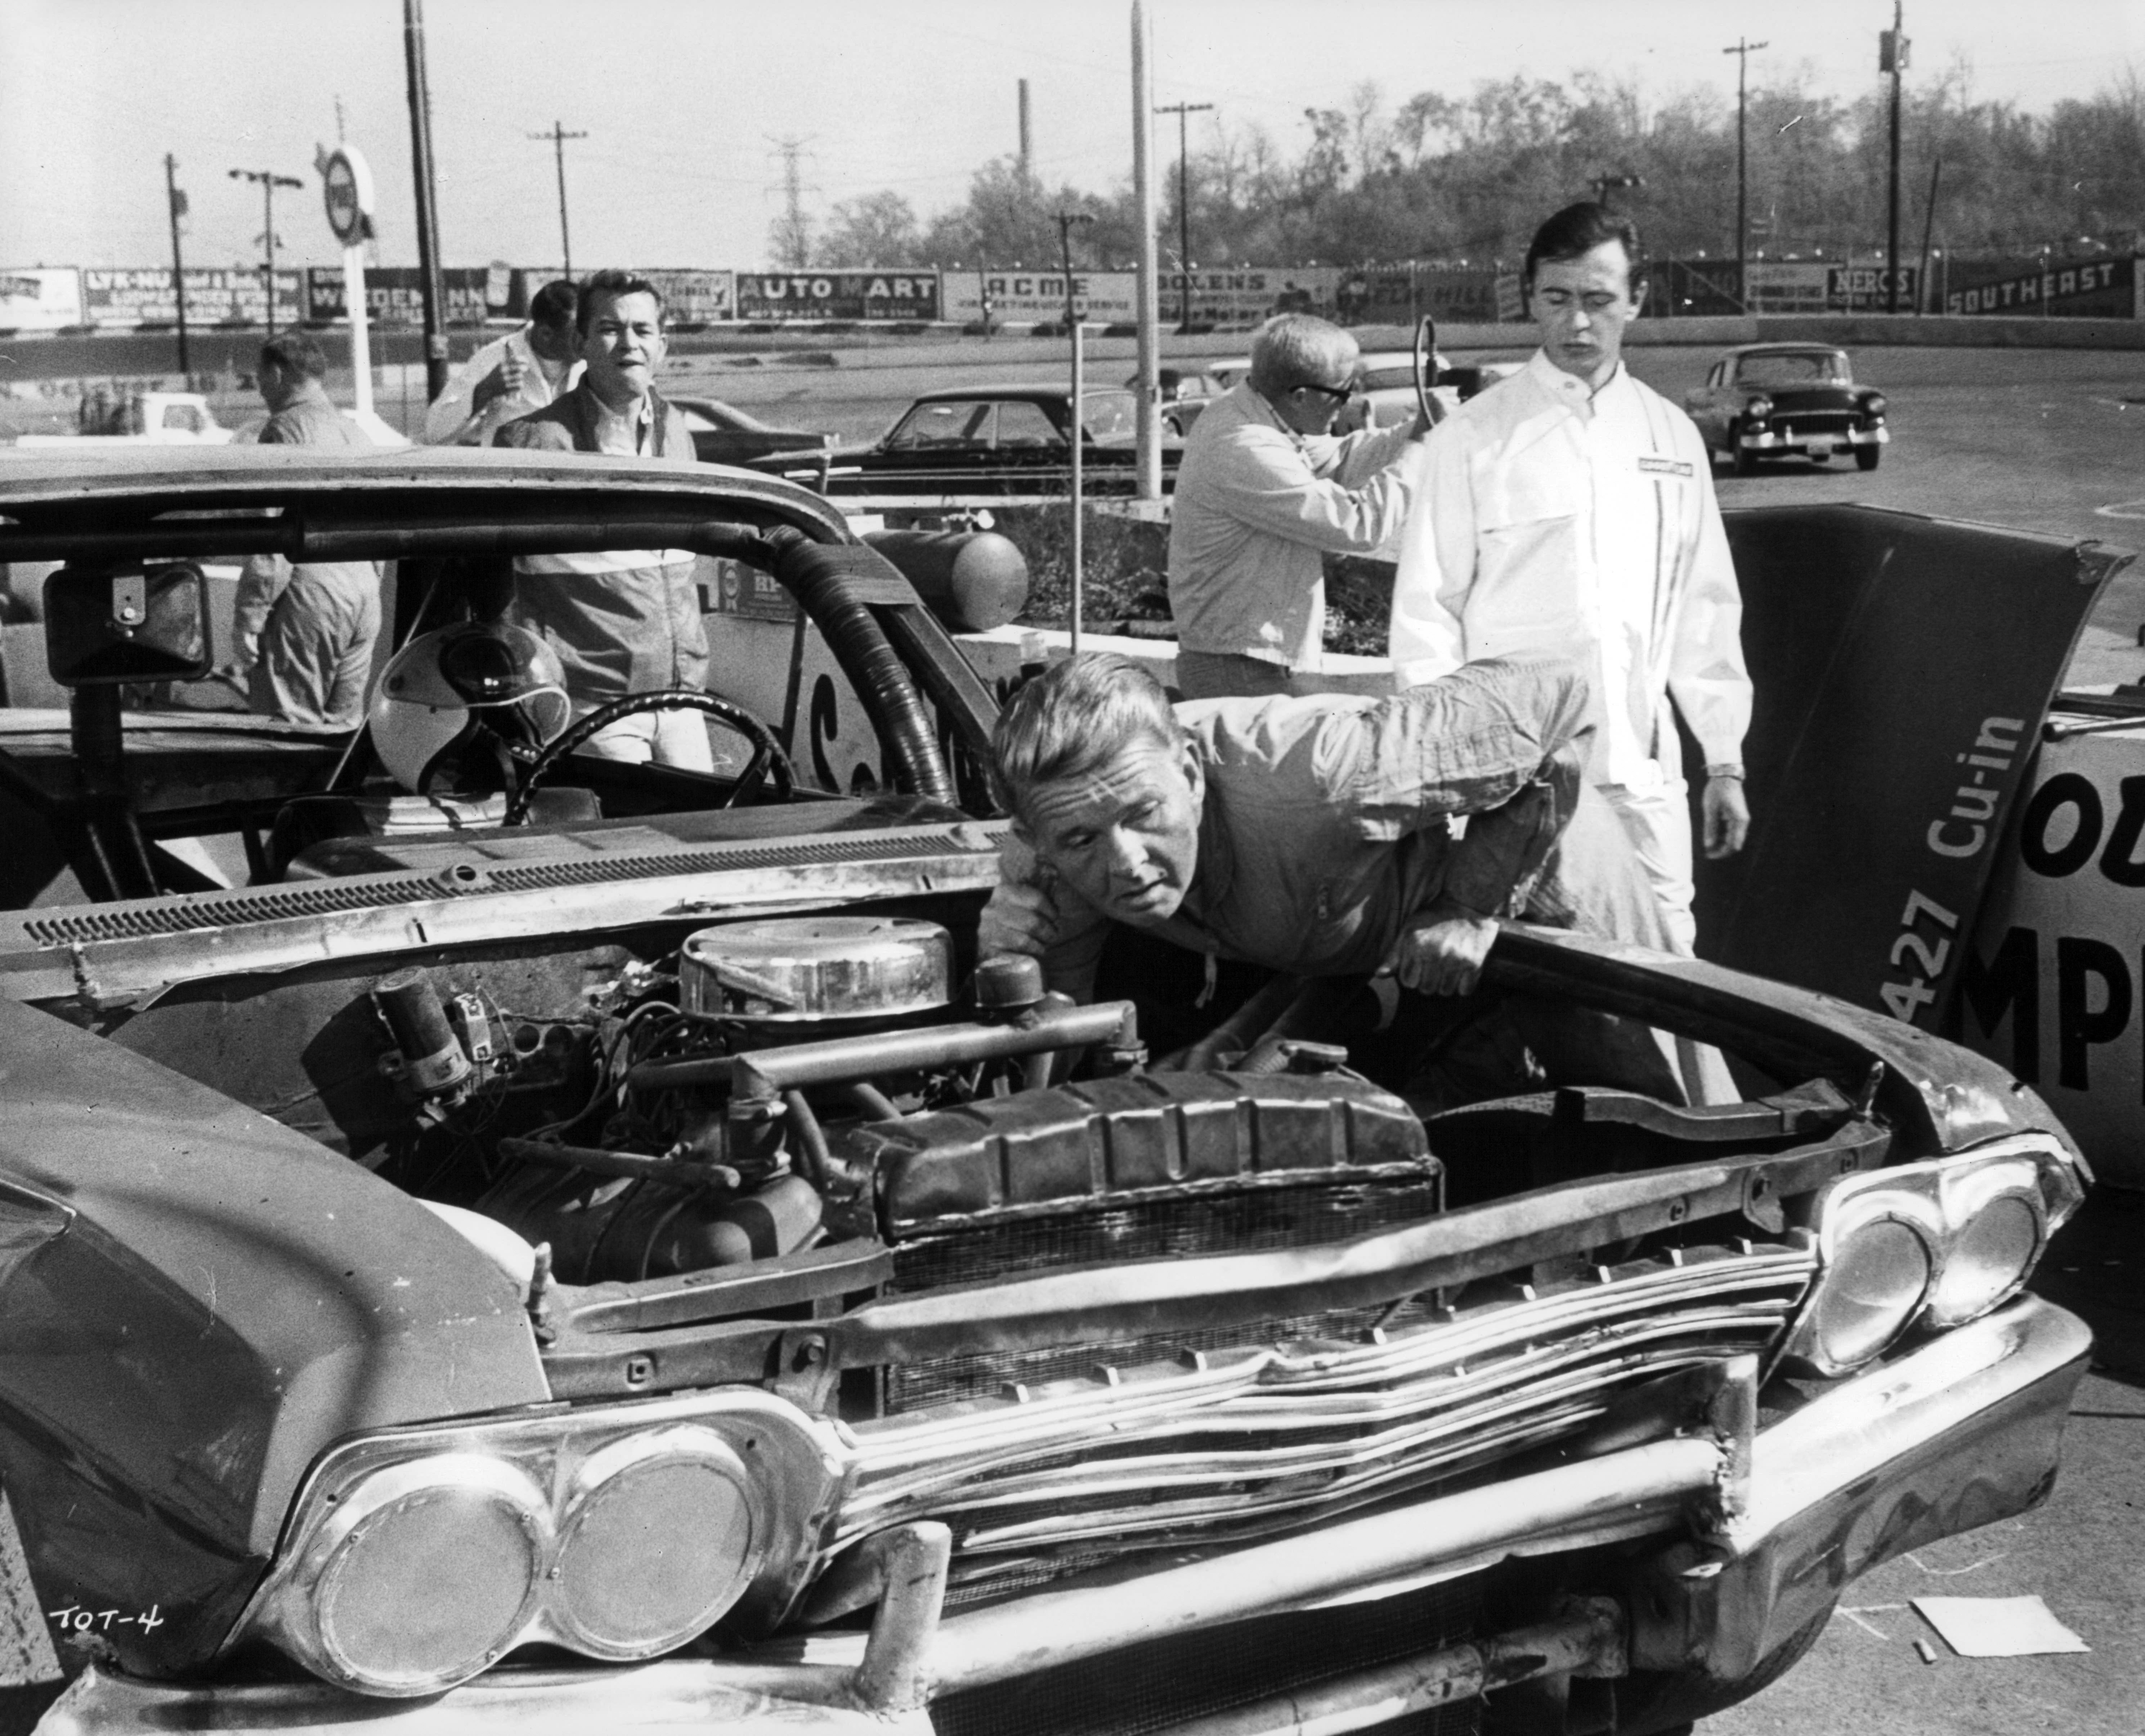 James Dobson inspects a car while Tommy Kirk watches in a scene from the film "Track of Thunder" in 1967 | Photo: United Artists/Getty Images